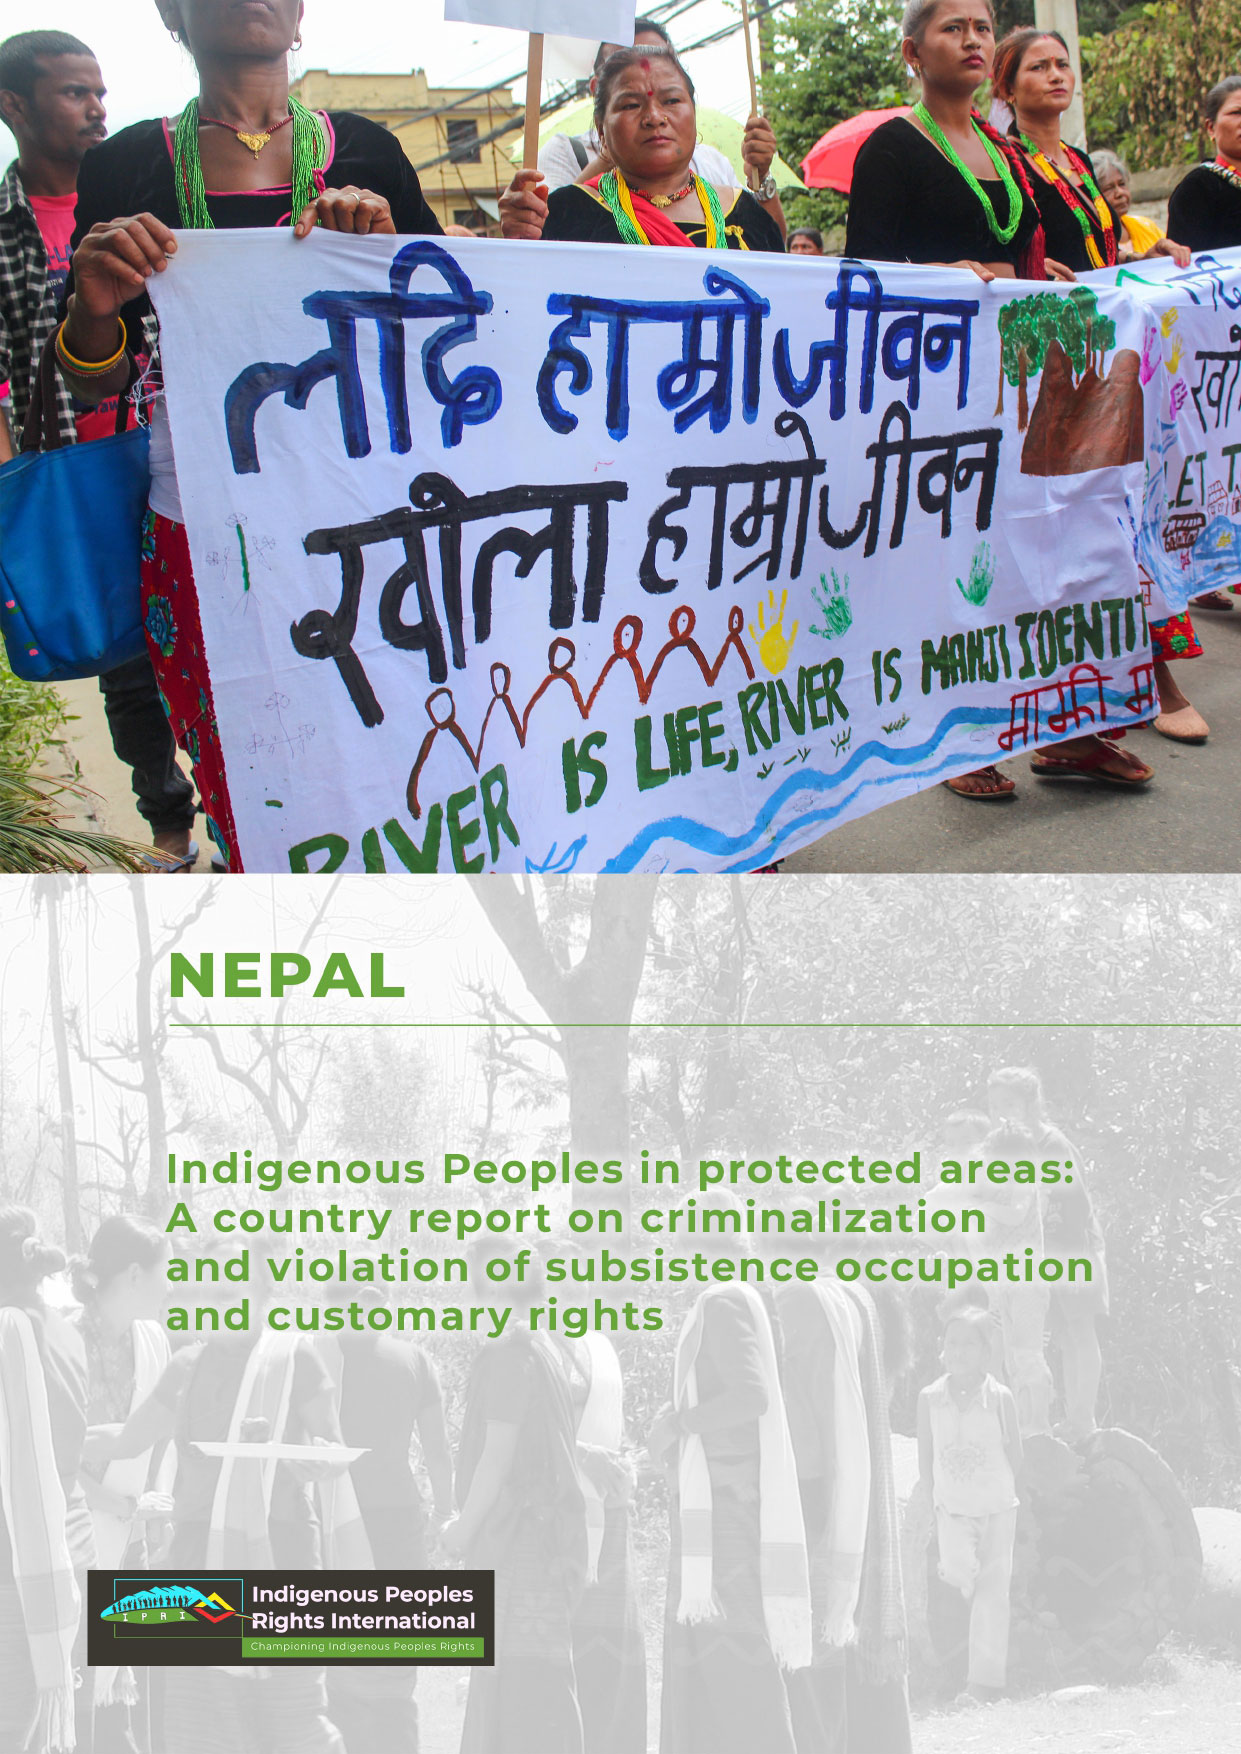 NEPAL || Indigenous Peoples in protected areas A country report on criminalization and violation of subsistence occupation and customary rights